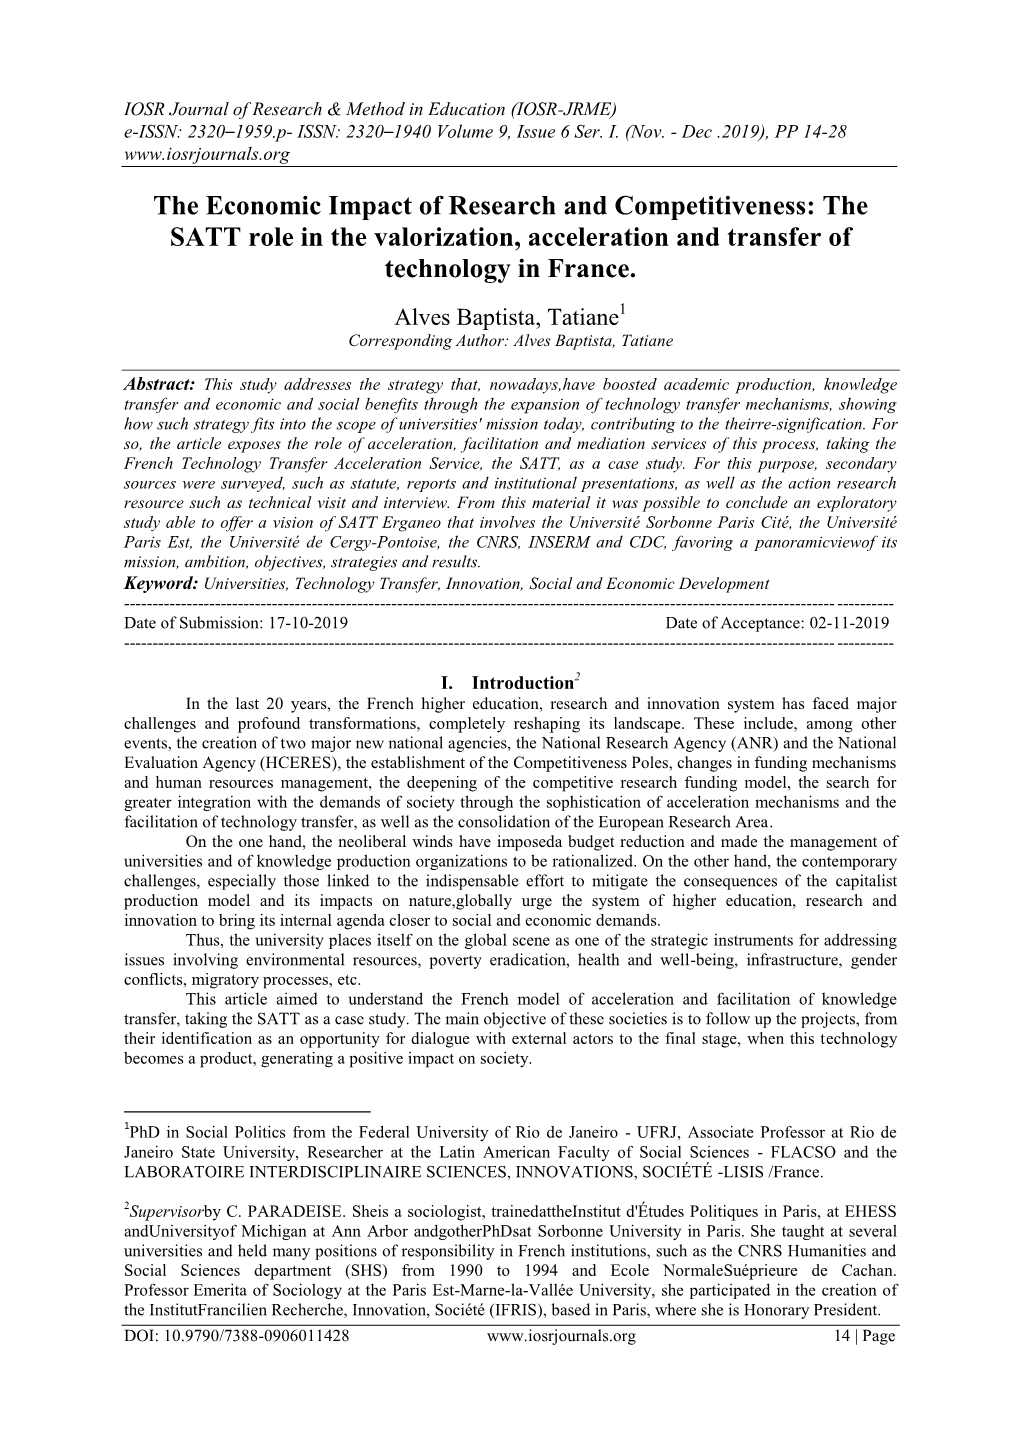 The Economic Impact of Research and Competitiveness: the SATT Role in the Valorization, Acceleration and Transfer of Technology in France